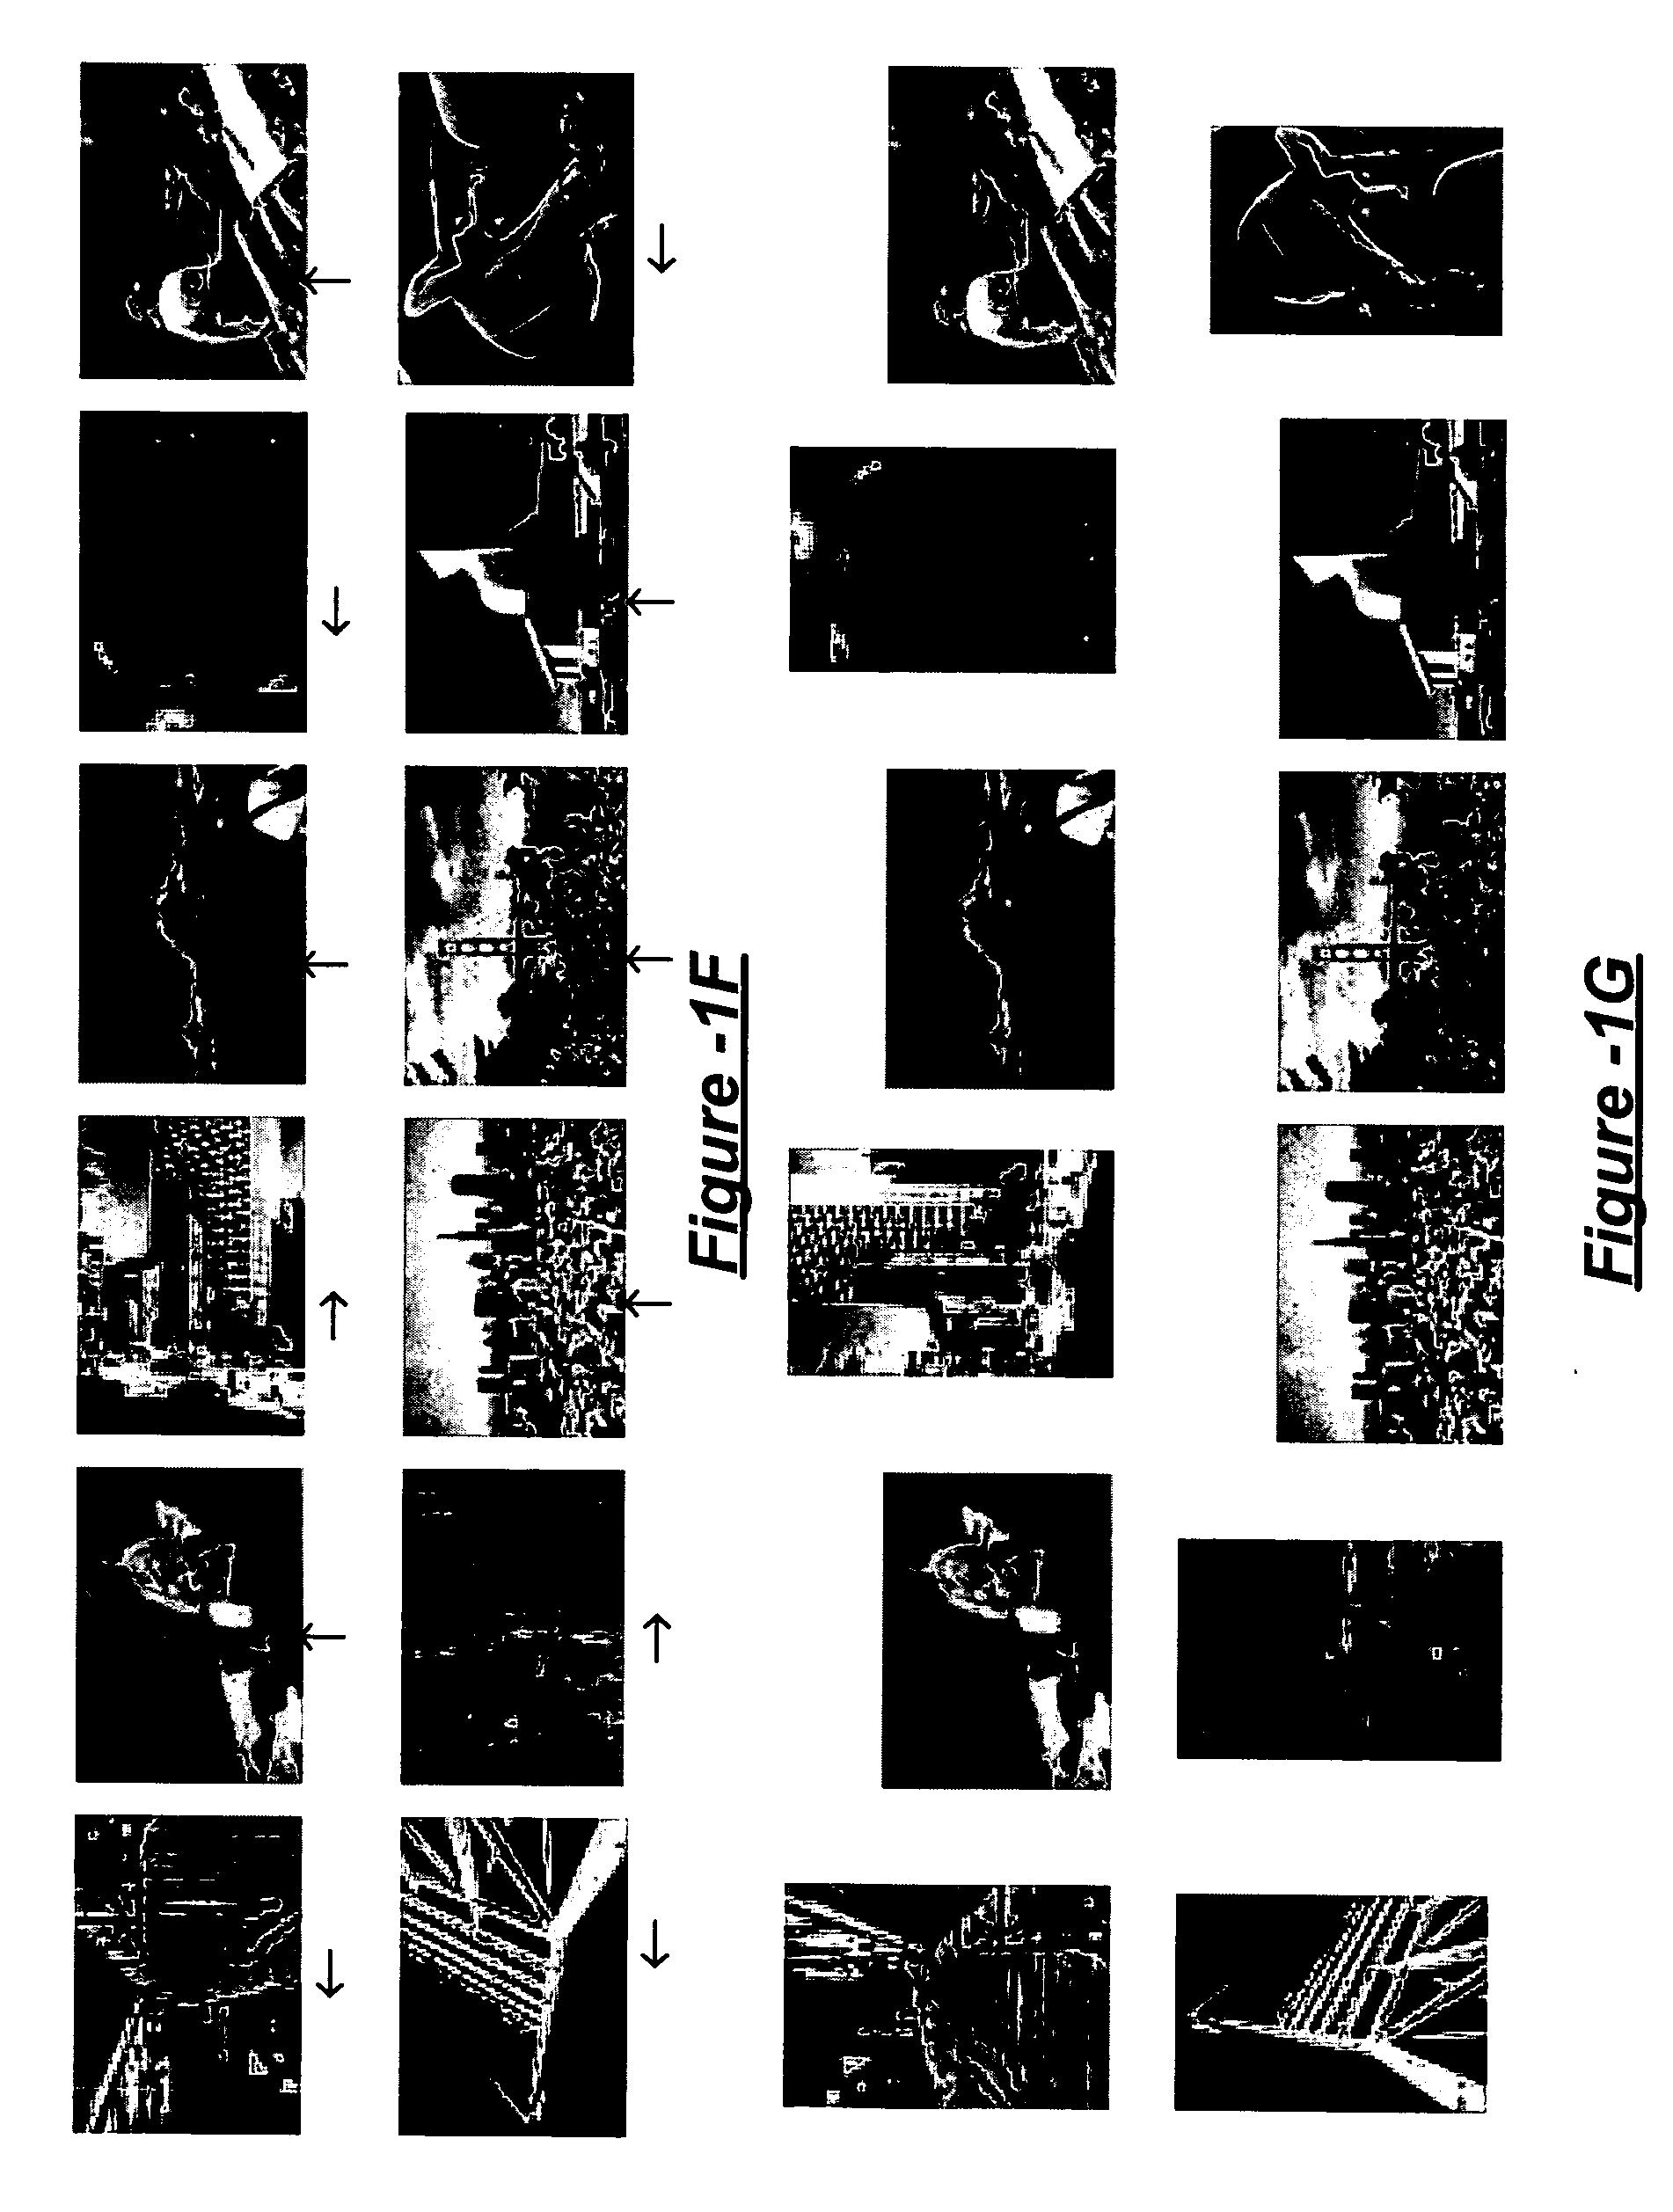 Method and apparatus for automatic image orientation normalization